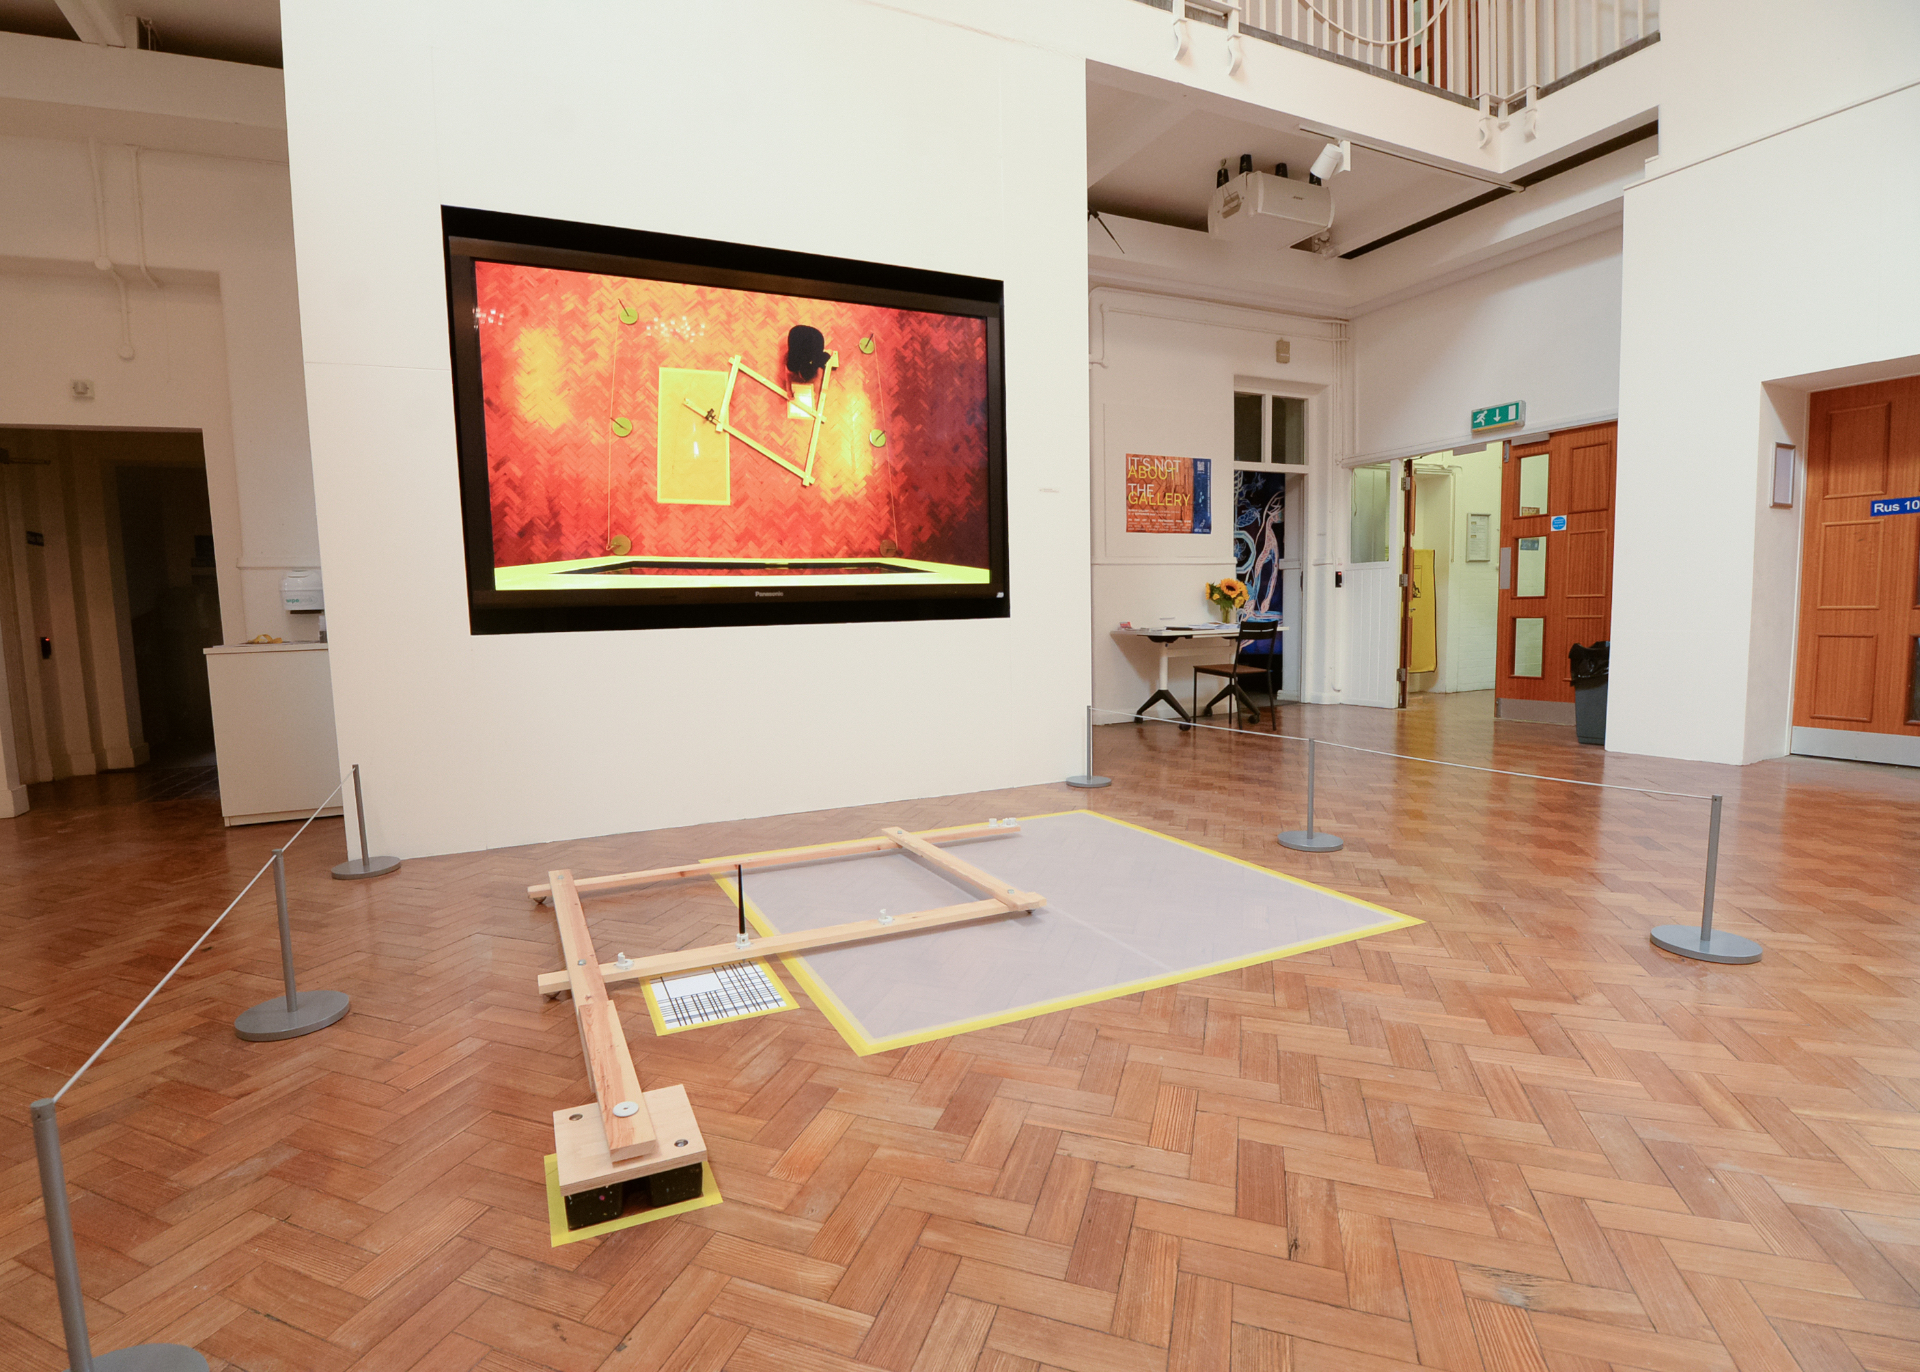 Pantograph on gallery floor, and displayed on video screen